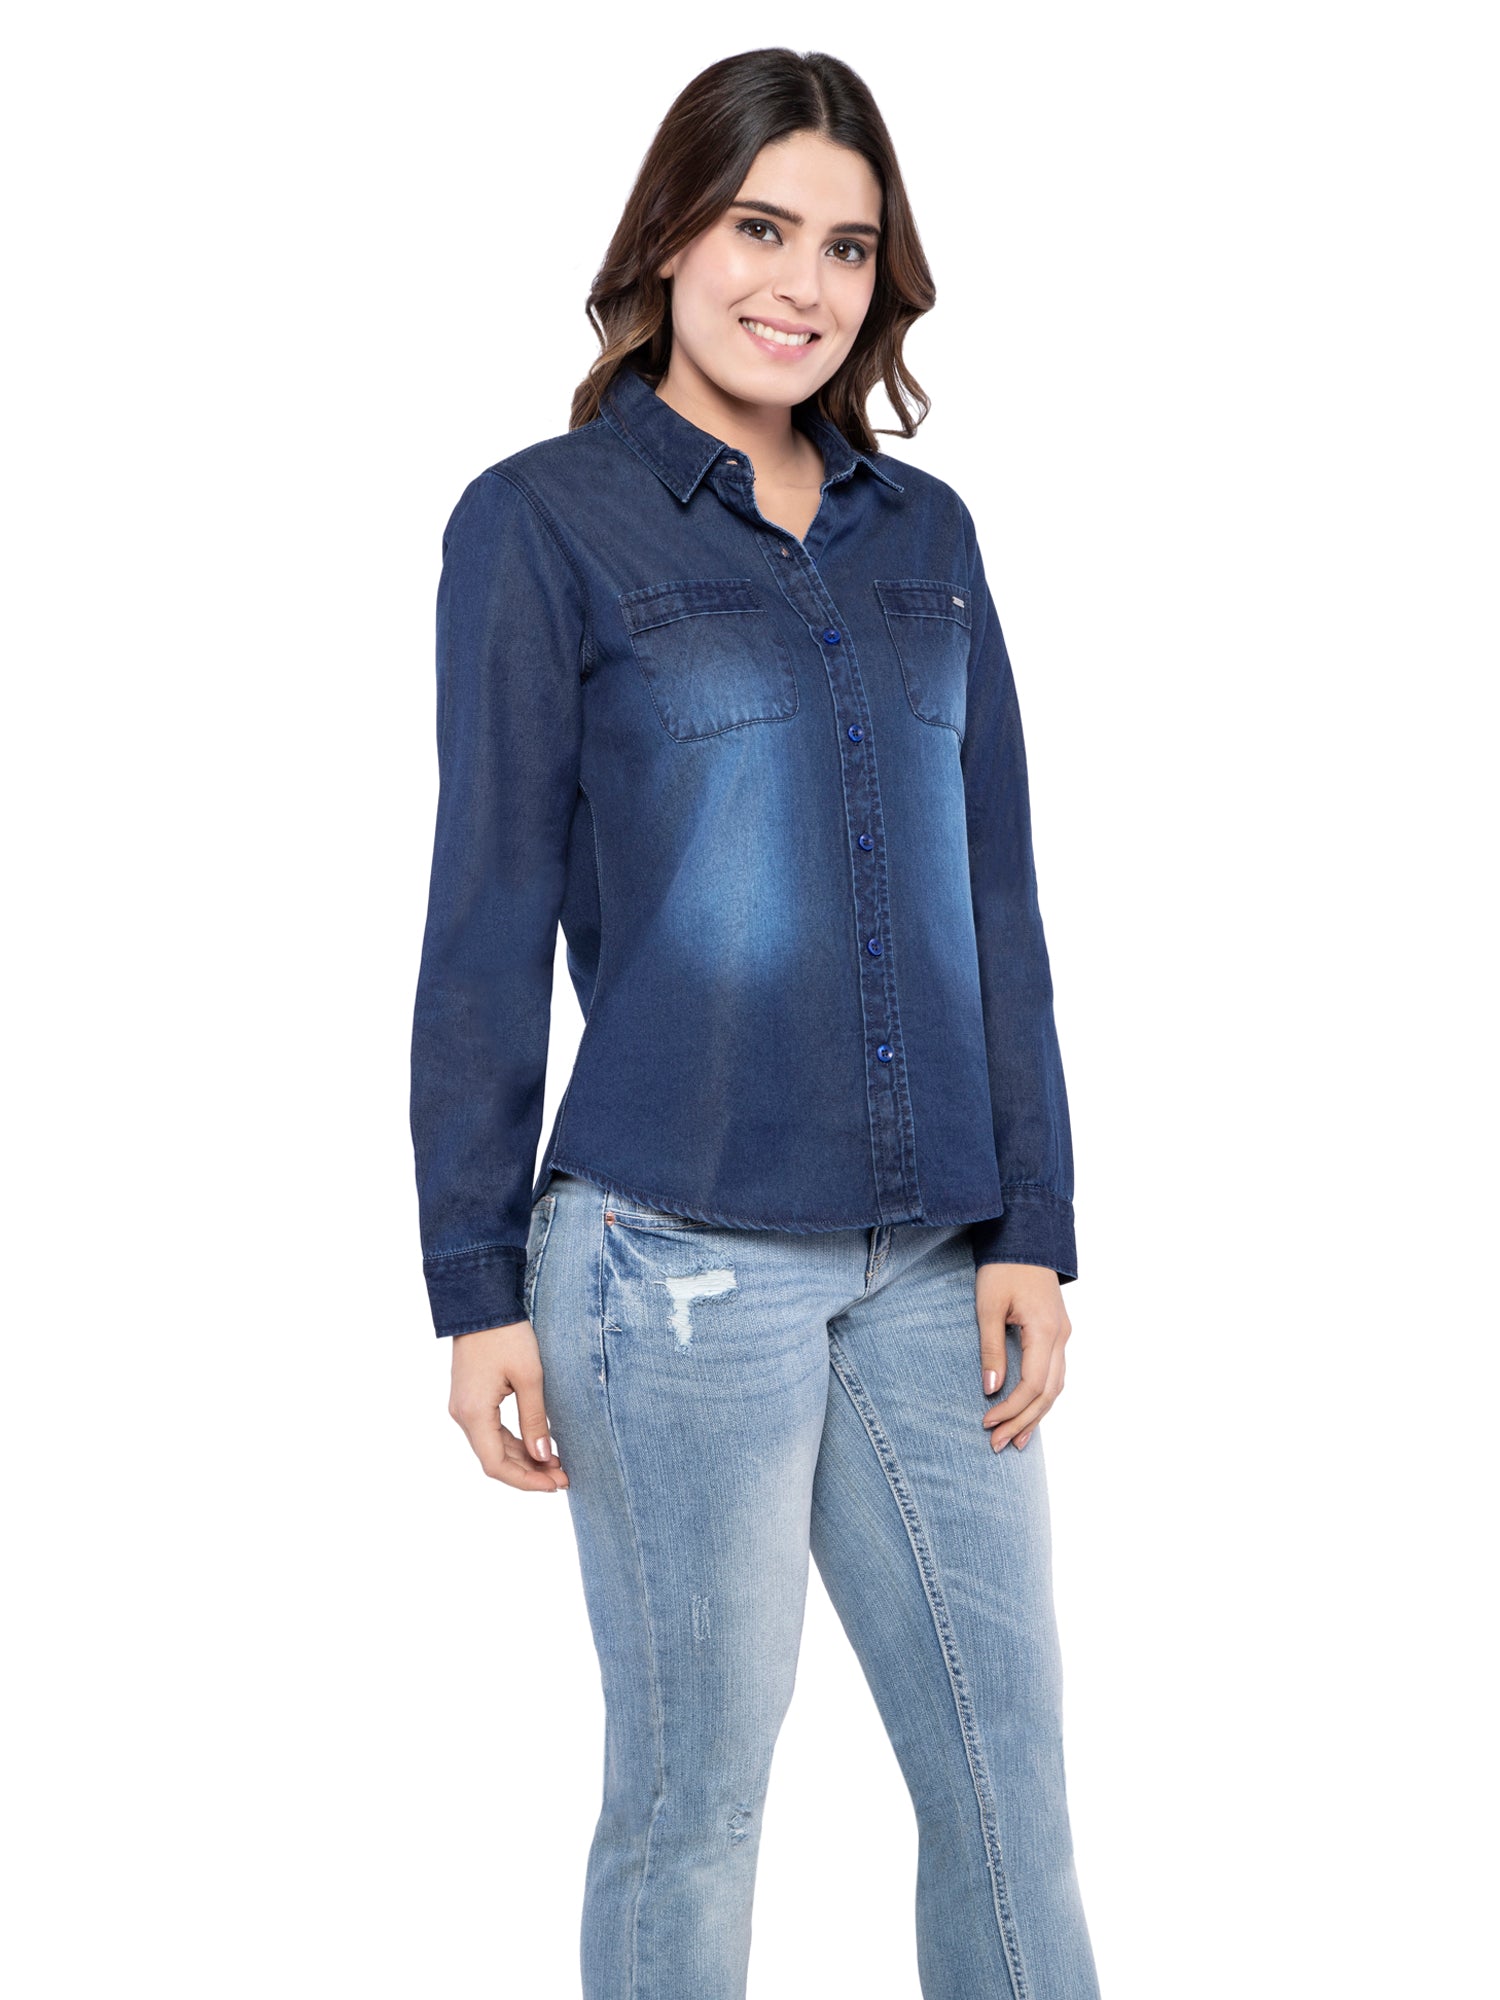 dark blue shirt with jeans for girl